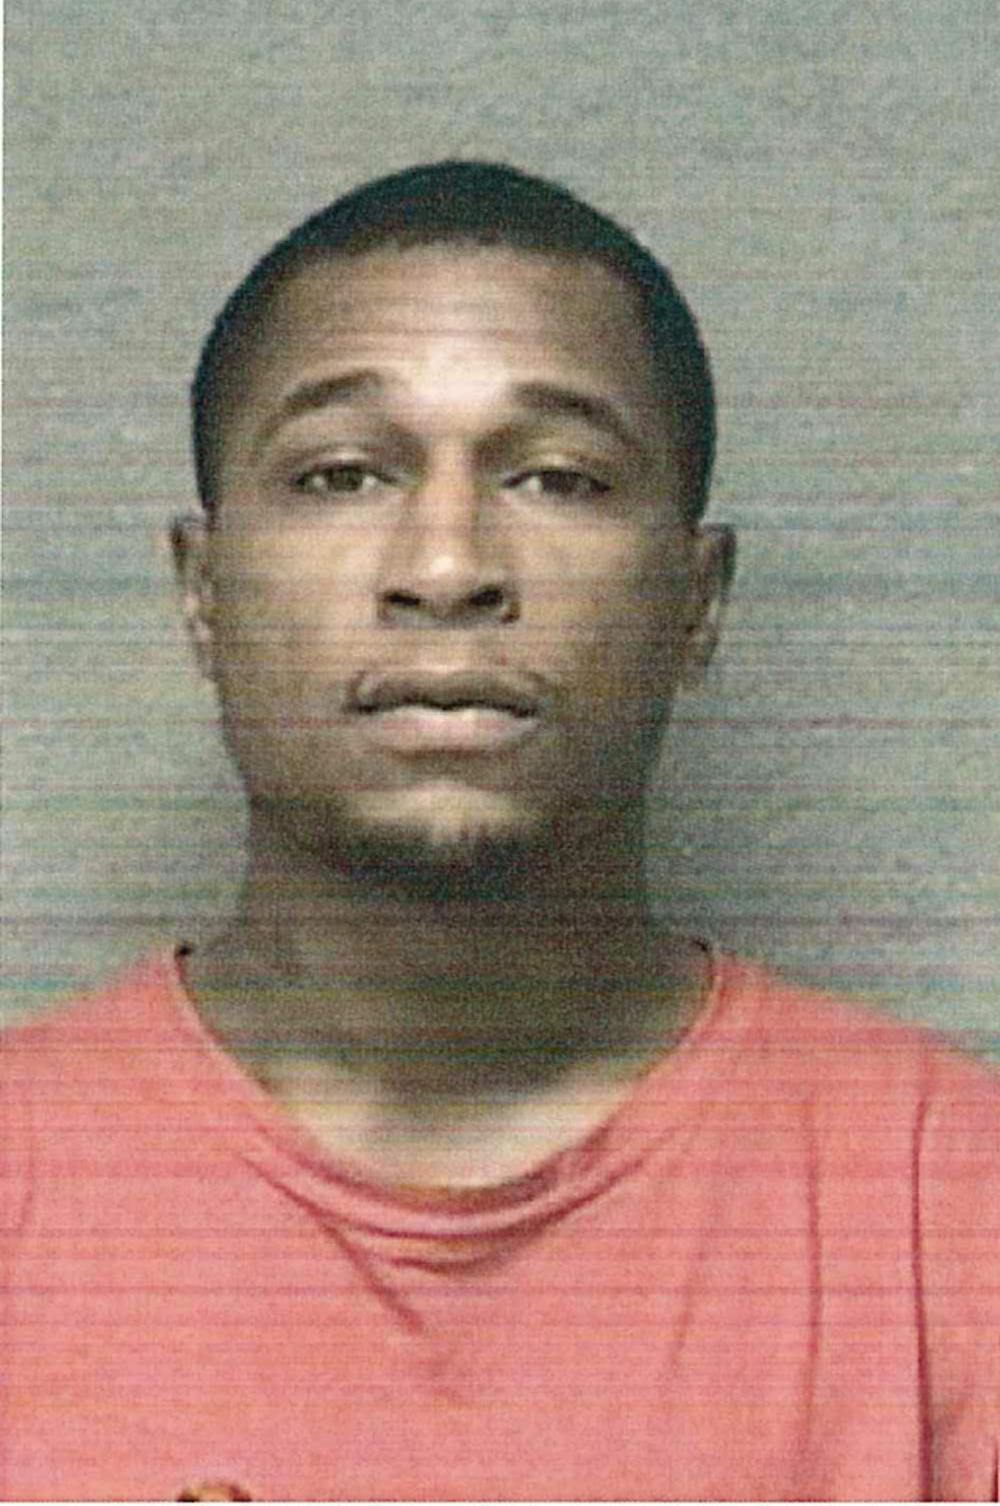 <p>Keith Childress, 29, Muncie, is preliminarily charged with aggravated battery, leaving the scene of a crime, reckless driving, resisting law enforcement and criminal recklessness with a vehicle after video testimony shows Childress backing up and hitting pedestrians at Be Here Now. <strong>Photo Provided, Delaware County Jail&nbsp;</strong></p>